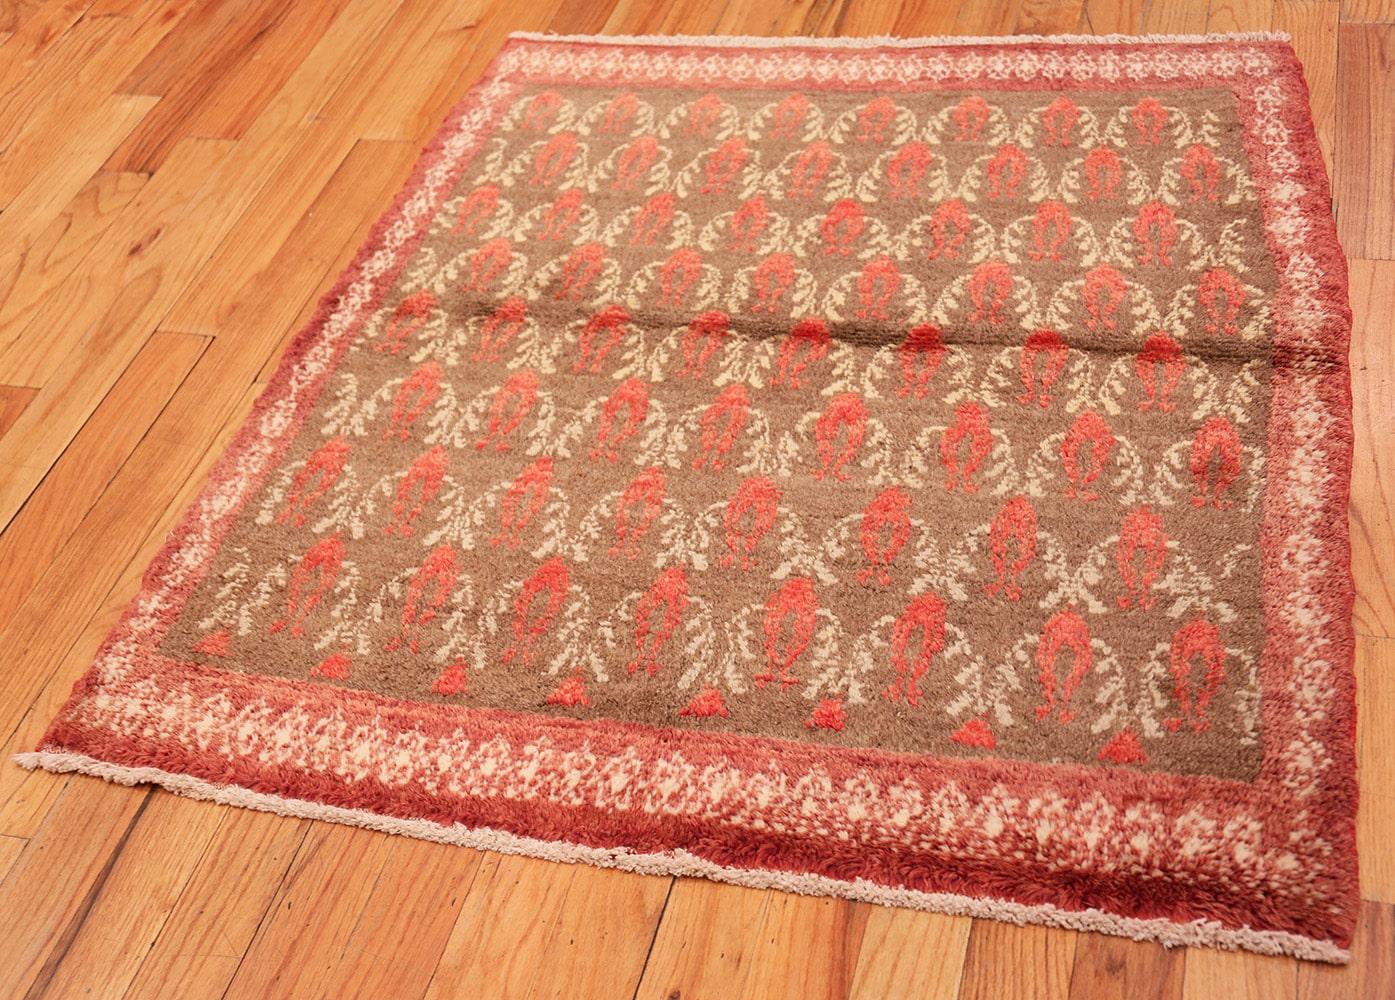 Wool Vintage Art Deco Turkish Rug. Size: 3 ft 10 in x 4 ft 3 in (1.17 m x 1.3 m)